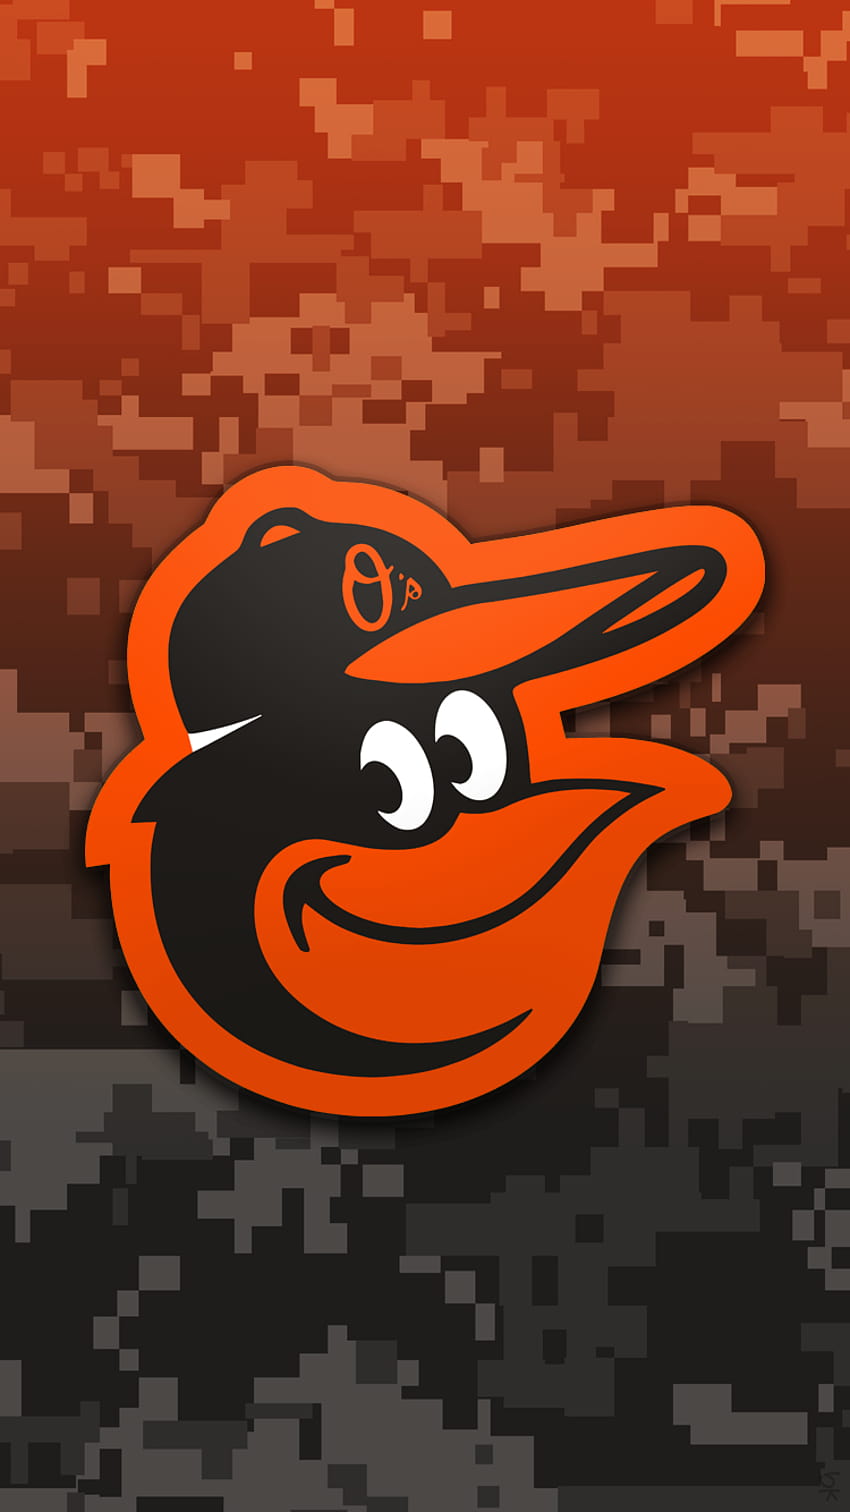 Download wallpapers Baltimore Orioles 4k scorched logo MLB orange  wooden background american baseball team grunge baseball Baltimore  Orioles logo fire texture USA for desktop with resolution 3840x2400 High  Quality HD pictures wallpapers